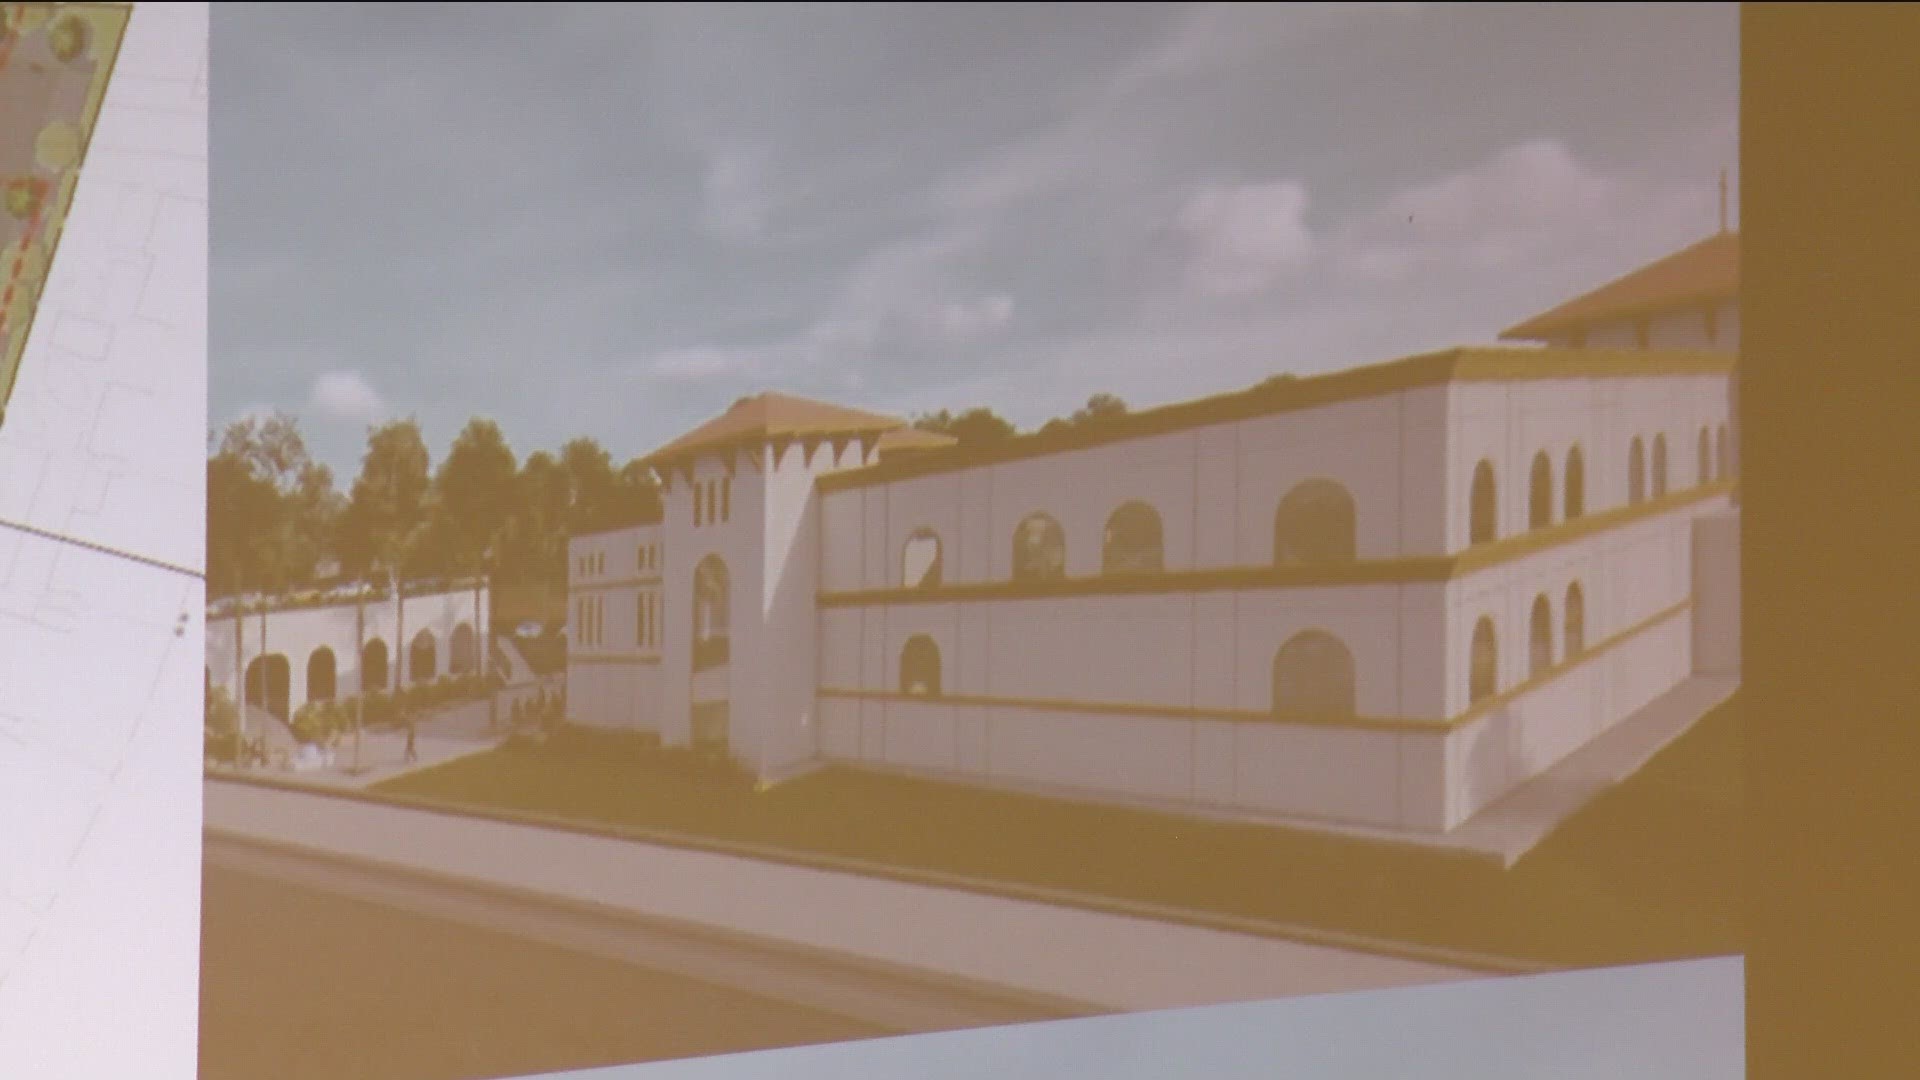 Del Cerro residents say the project will bring traffic, congestion and other impacts.